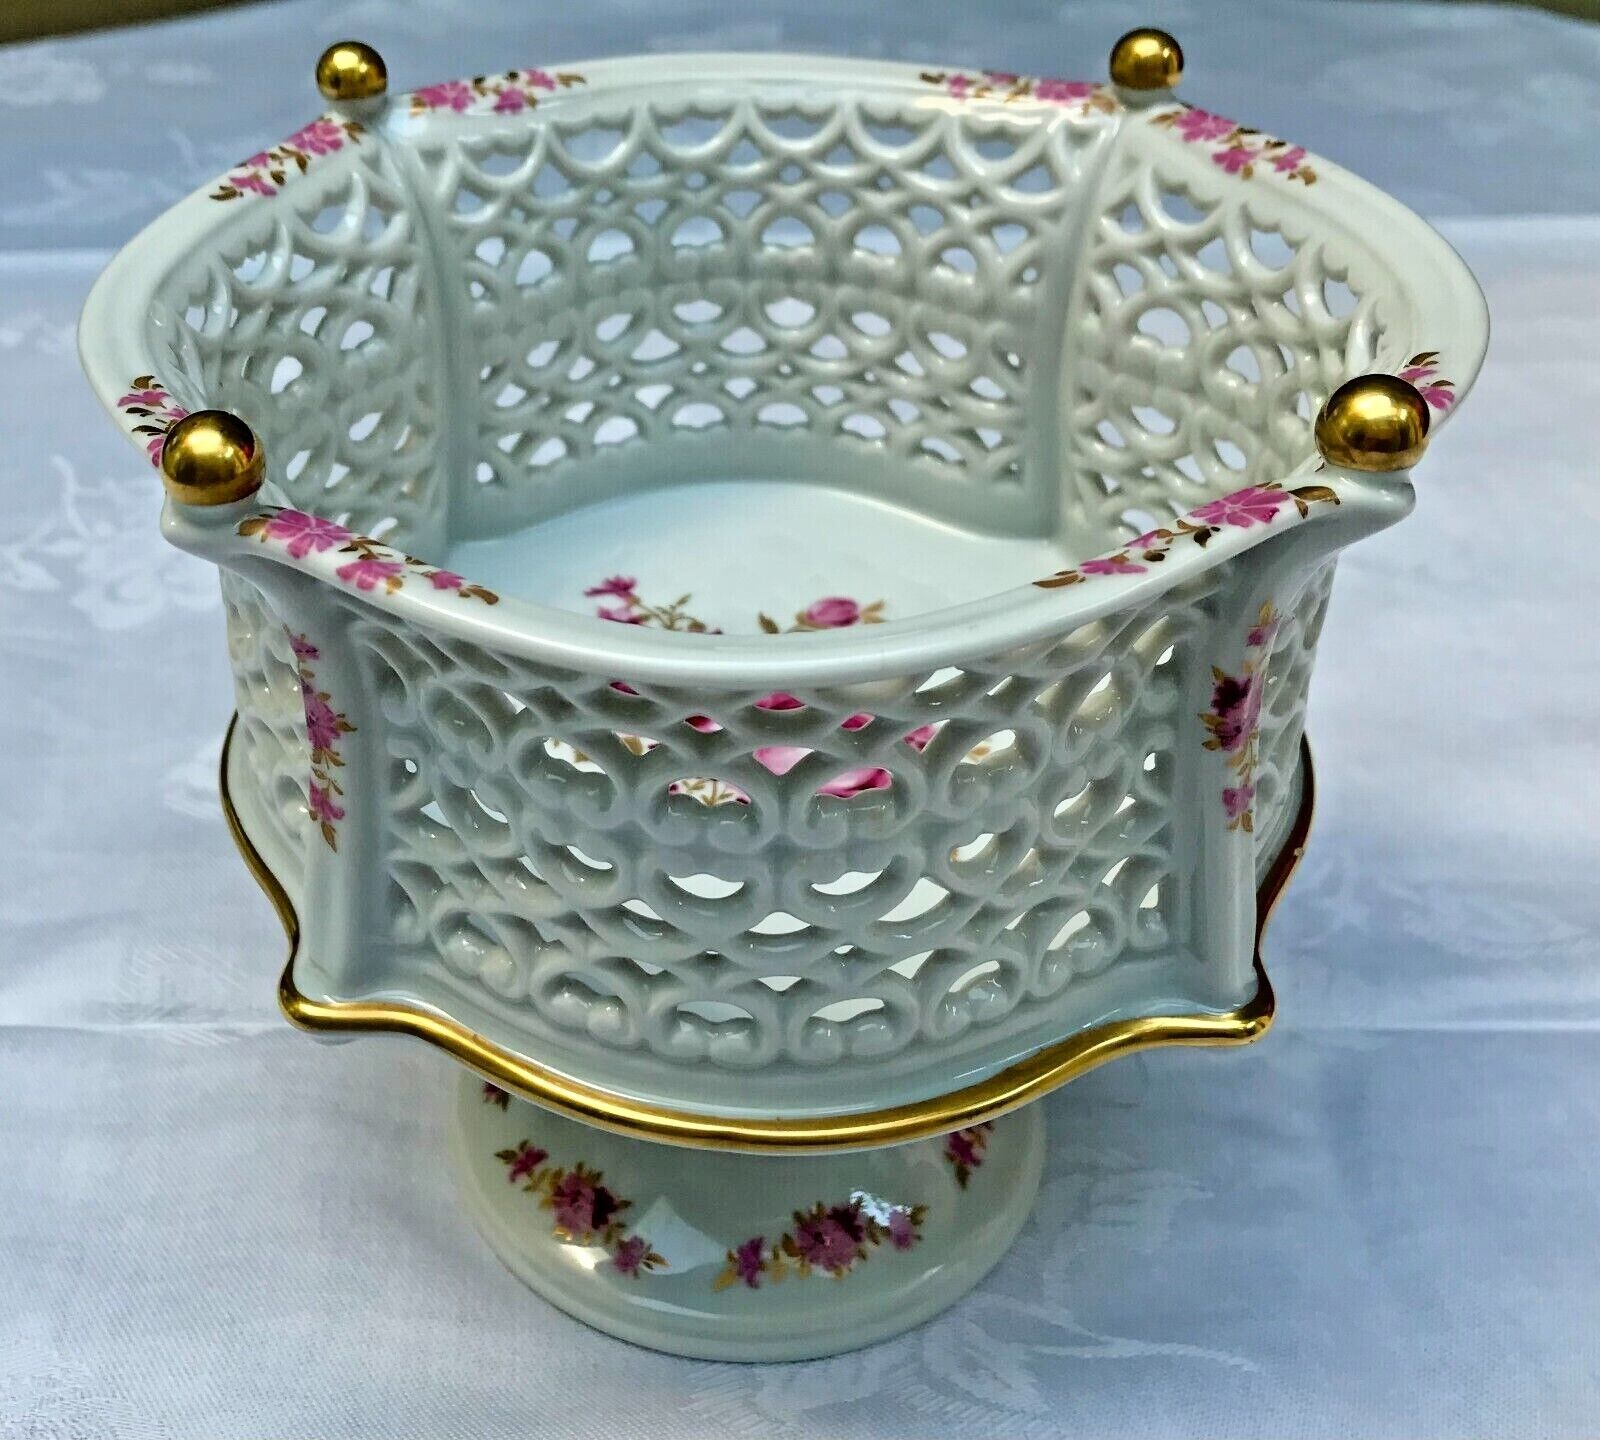 WALLENDORF (GERMANY) PORCELAIN OPEN WORK RETICULATED CANDY DISH BOWL ON STAND